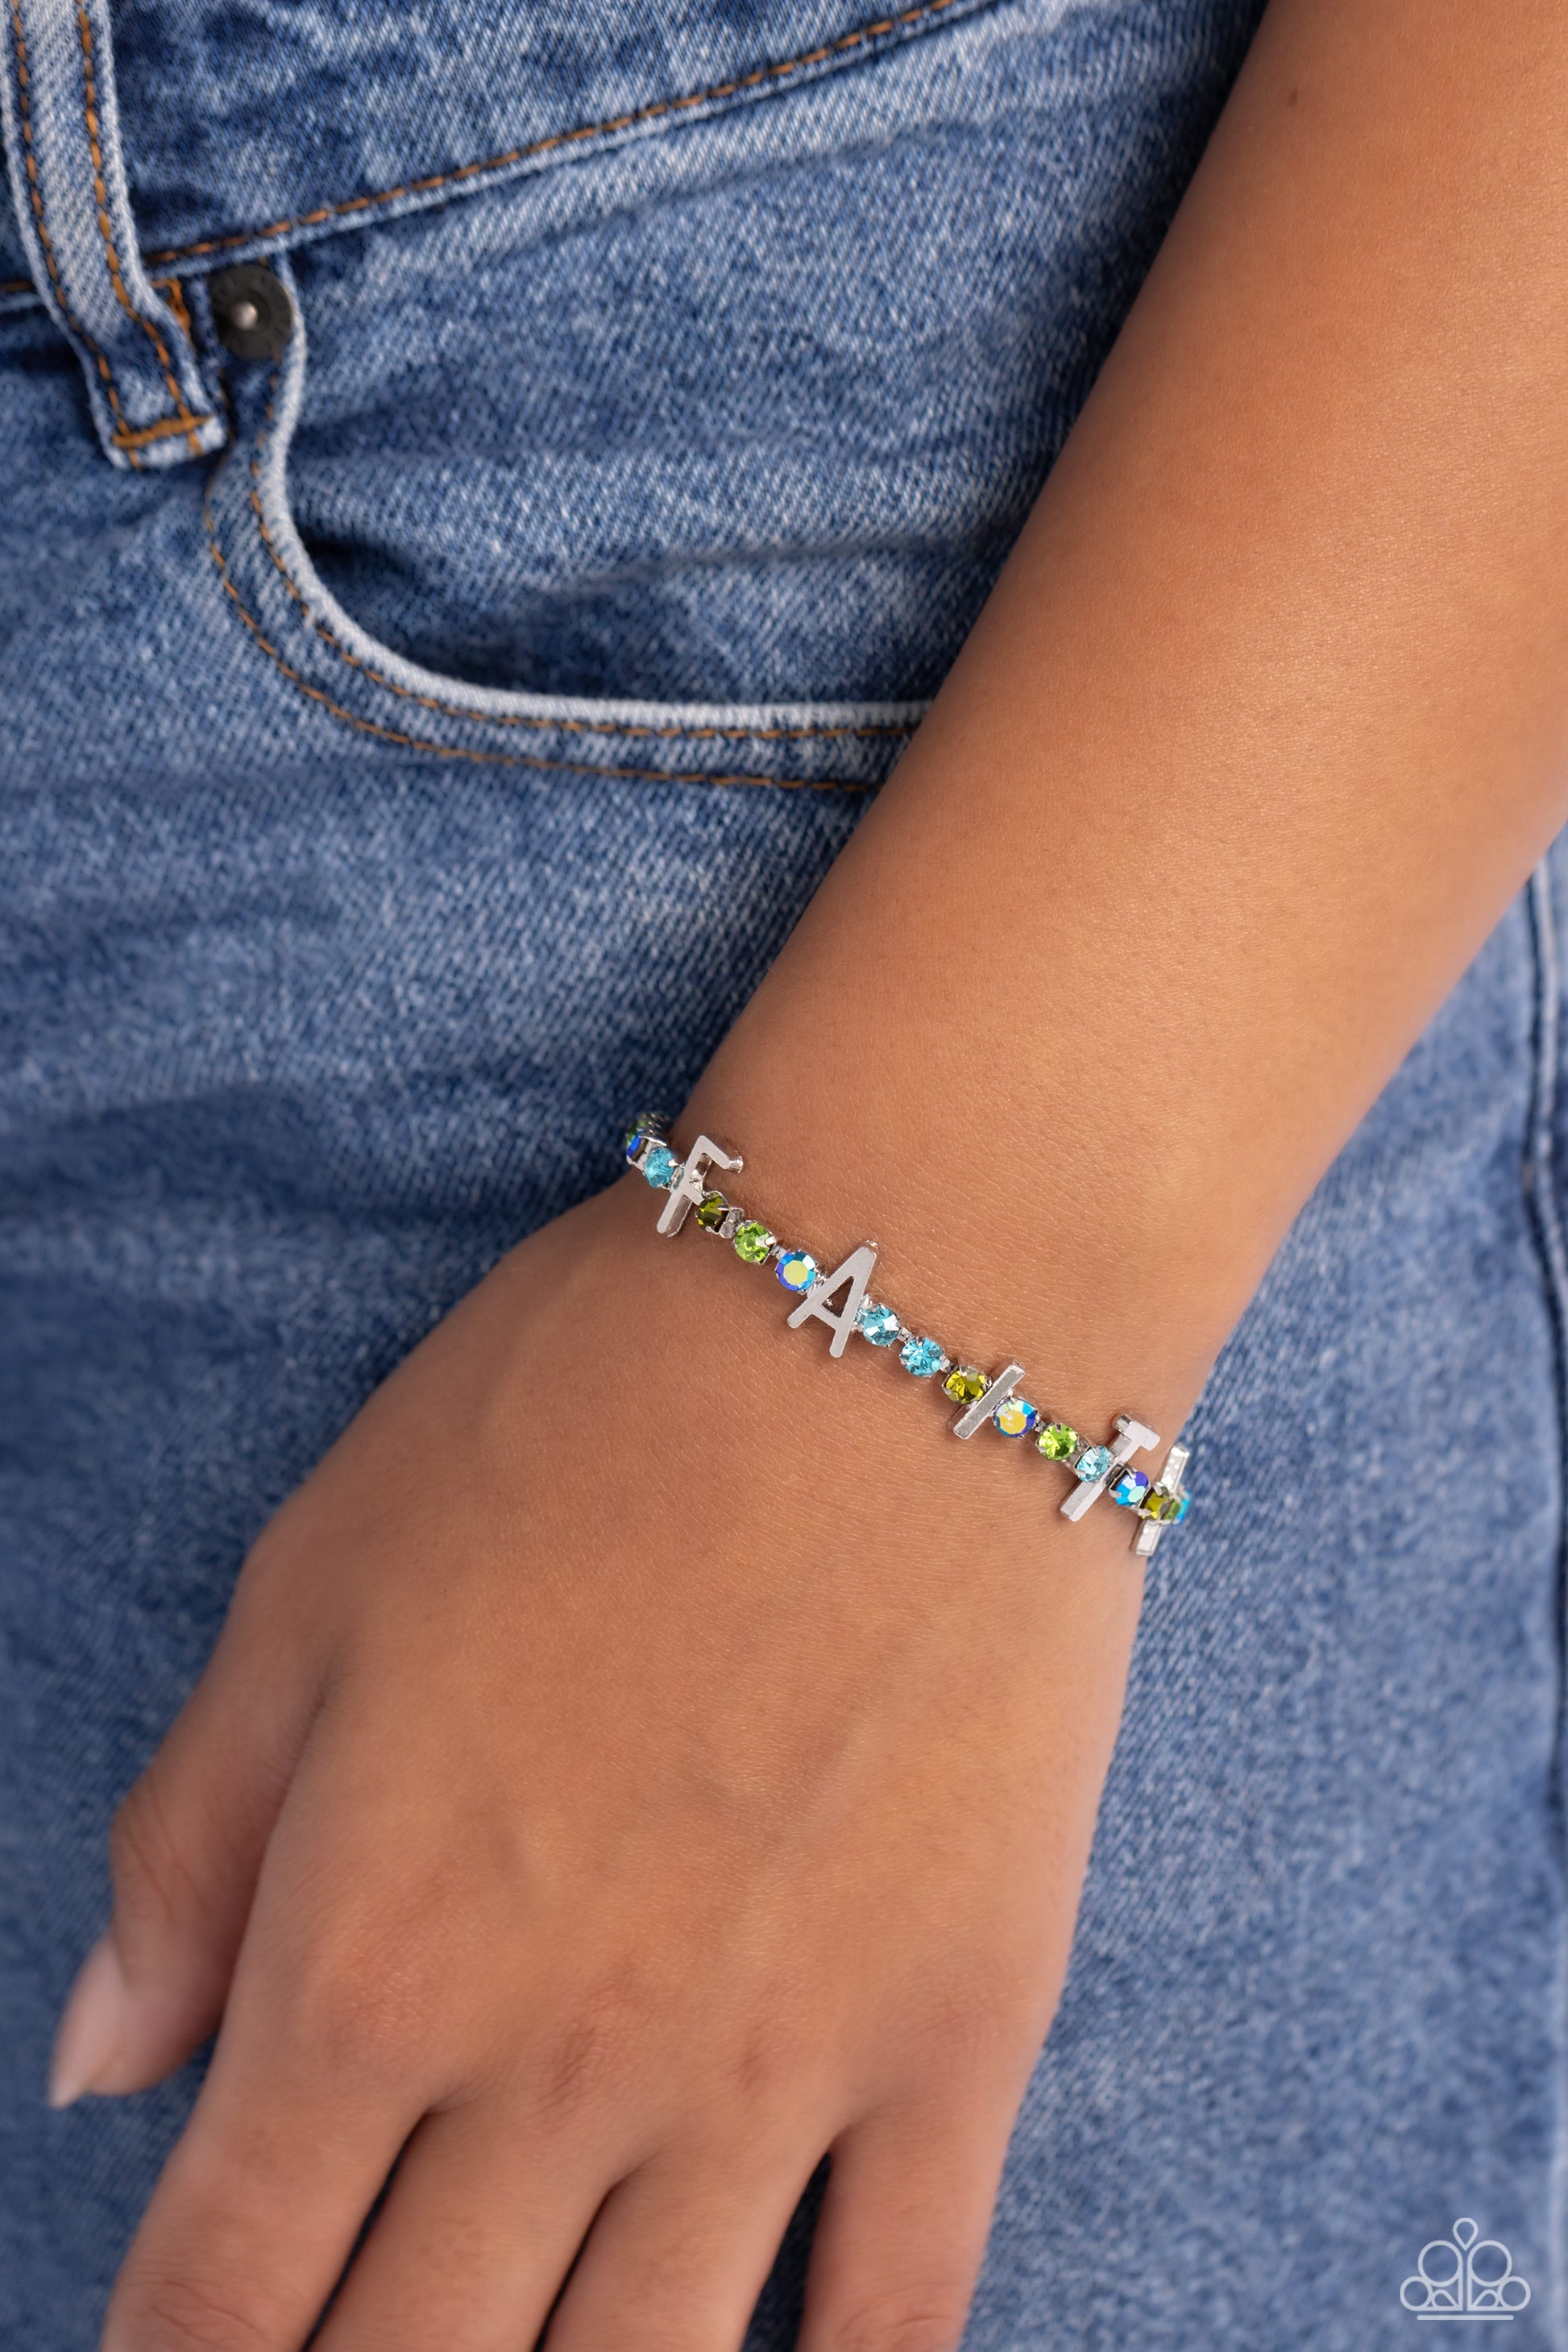 Set in silver square fittings, various multicolored rhinestones gleam around the wrist. Infused along the design, sleek silver letters spell out the word "FAITH" for an inspirational finish. Features an adjustable clasp closure. Due to its prismatic palette, color may vary.